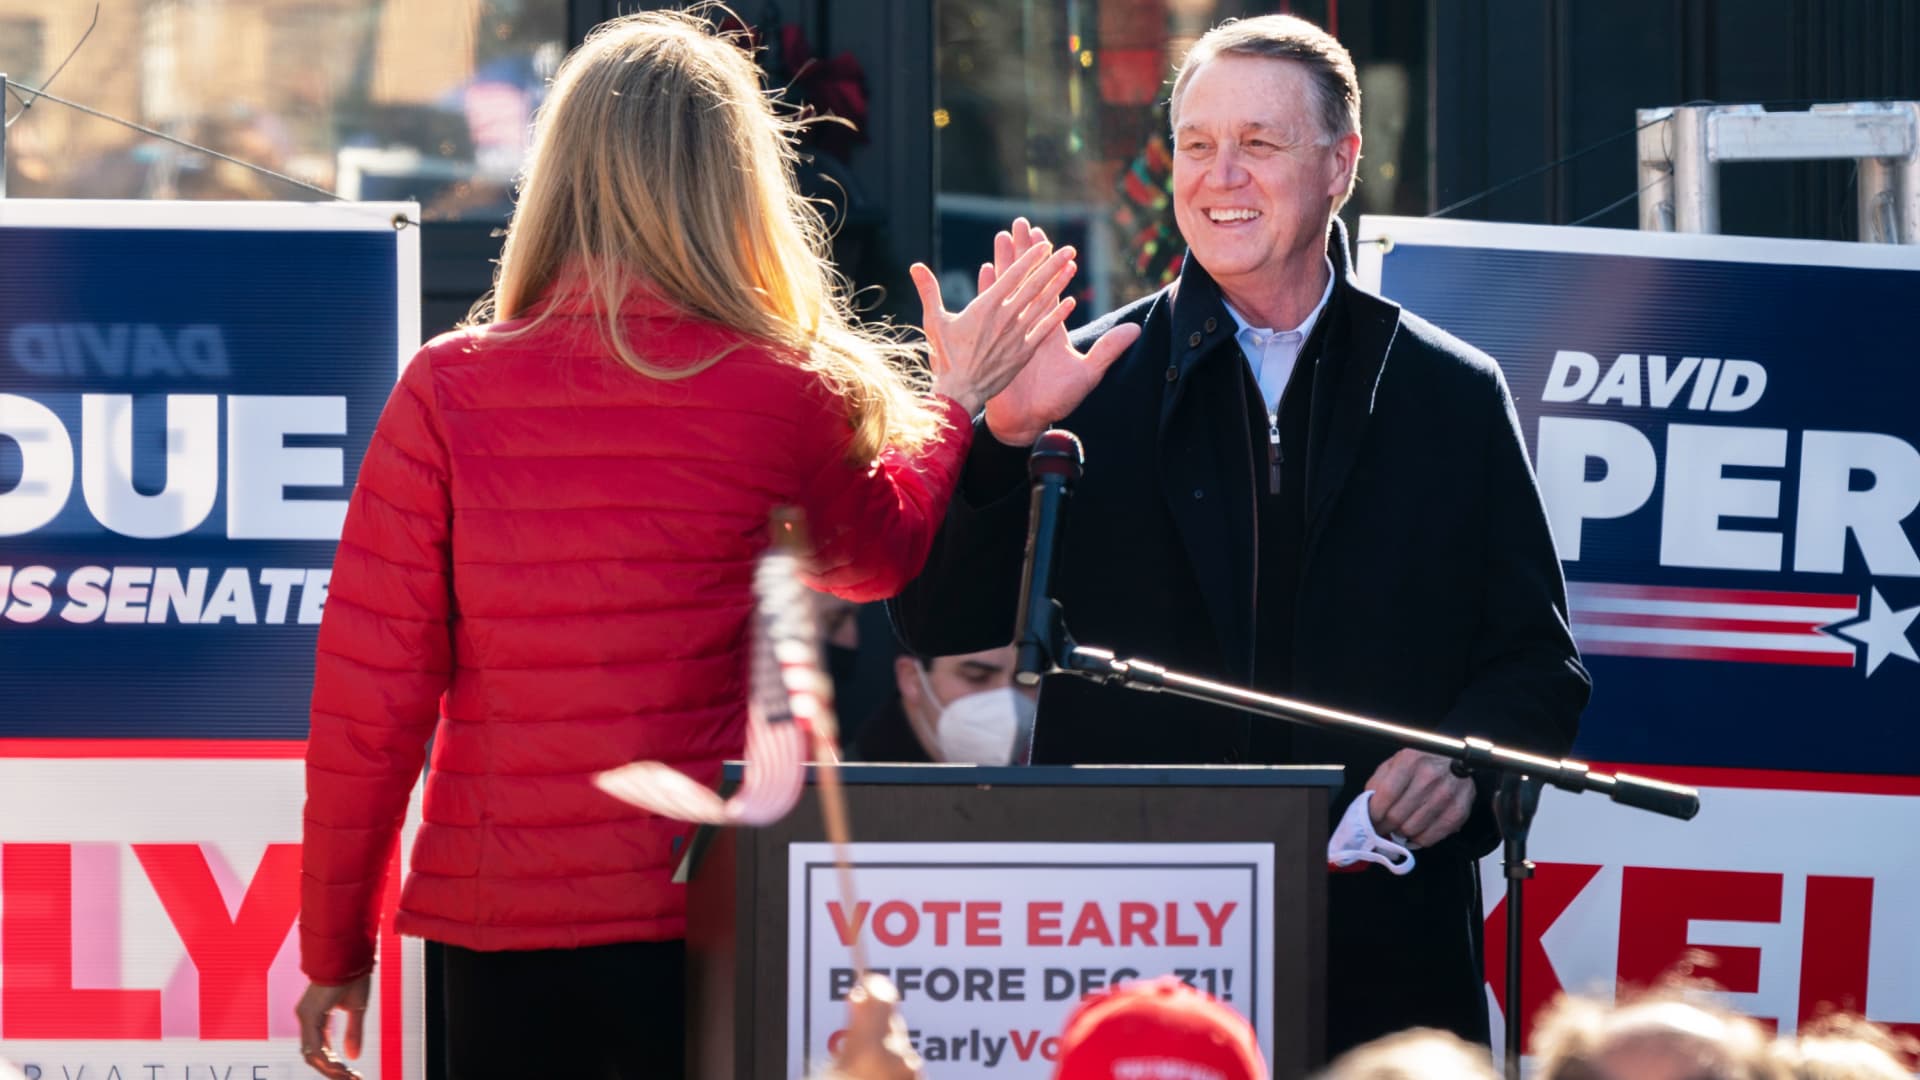 Senators Kelly Loeffler (R-GA) and David Perdue (R-GA) high five each other as Perdue takes the stage to speak during a campaign event on December 21, 2020 in Milton, Georgia.